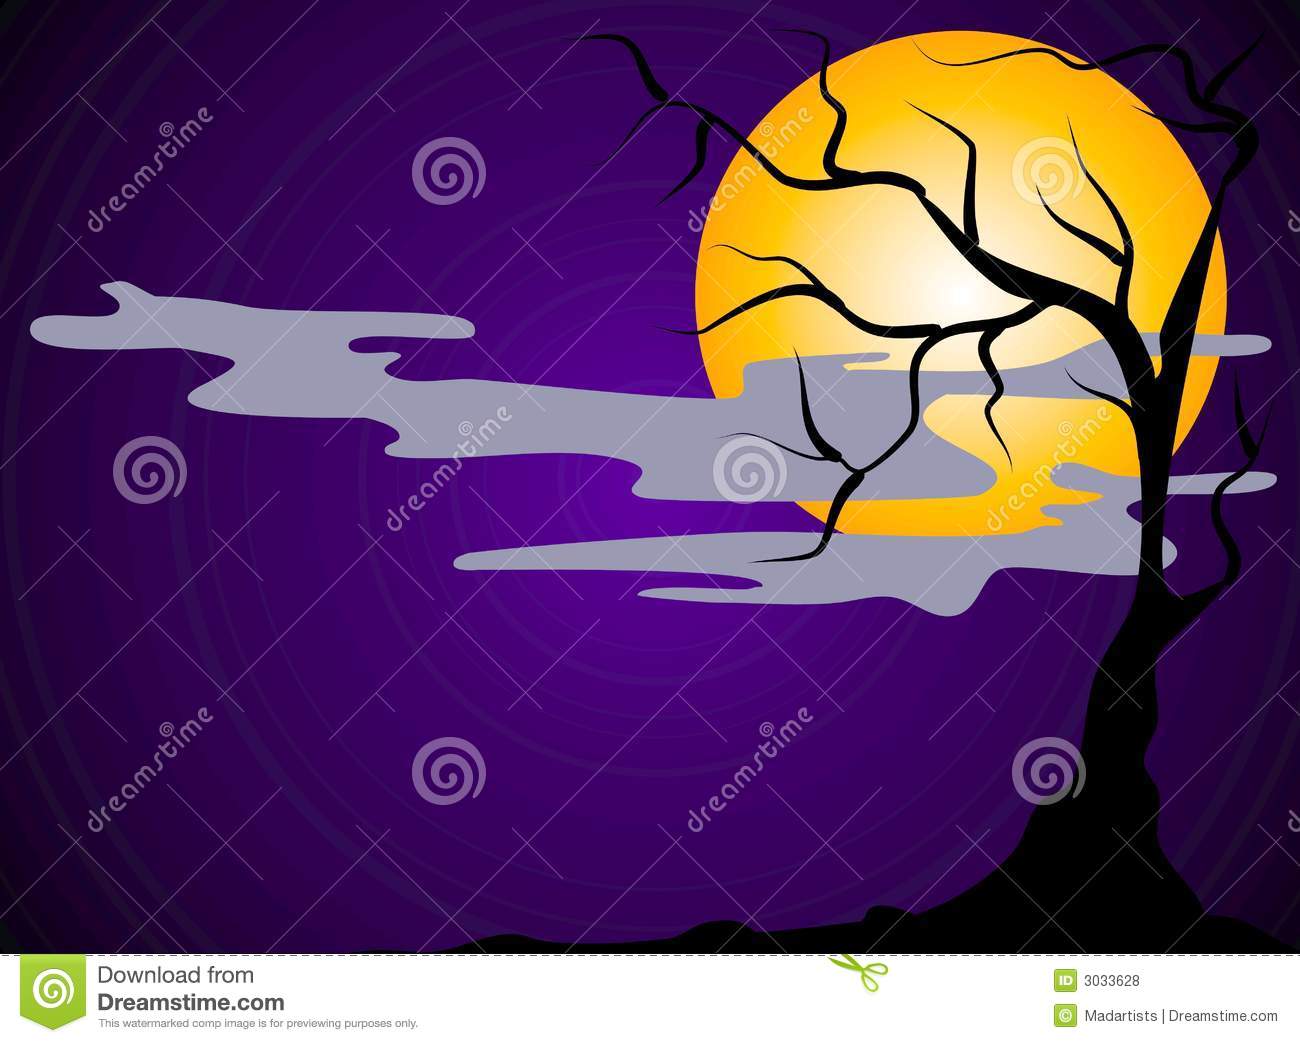 Full moon silhouette clipart clouds spooky.